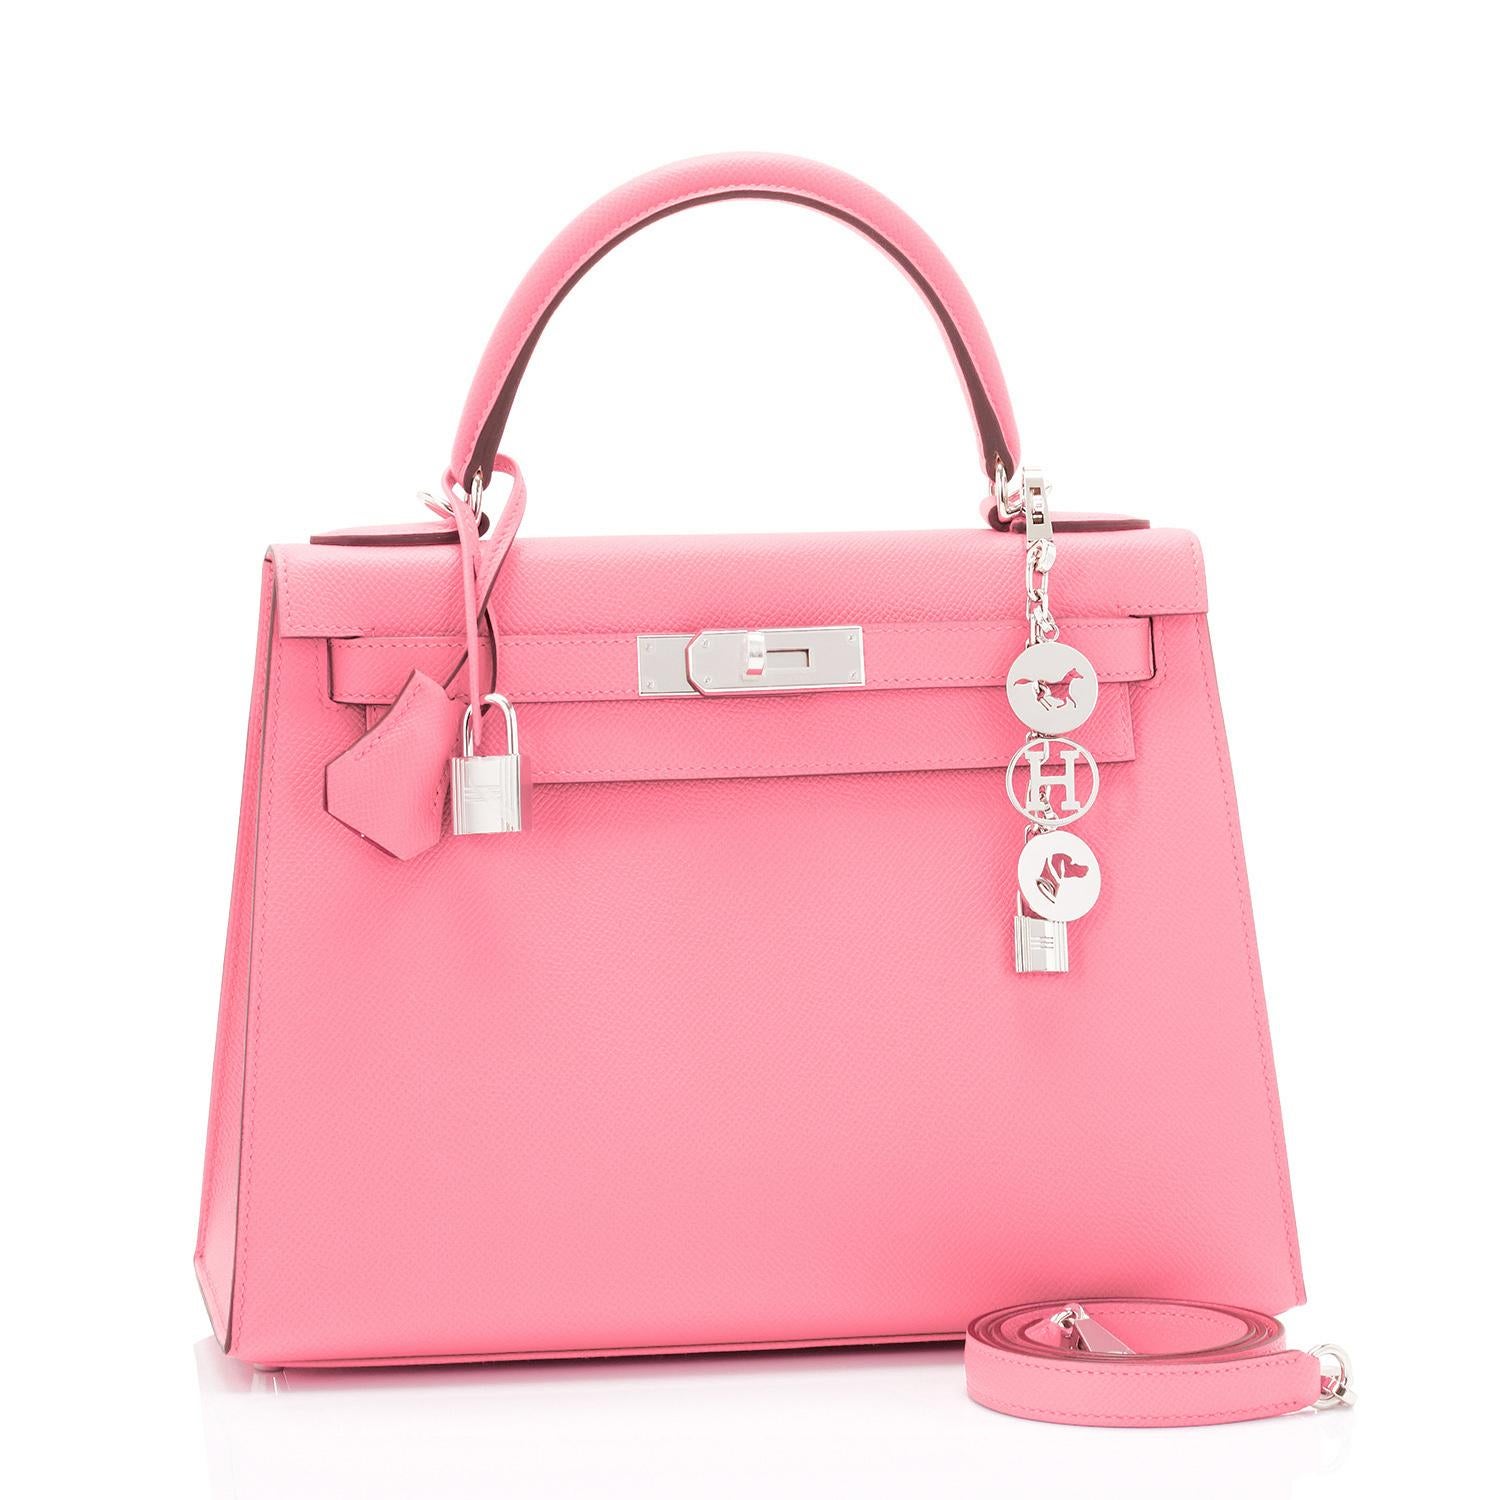 Hermes Kelly 28cm Rose Confetti Pink Sellier Shoulder Bag NEW IN BOX
Brand New in Box. Store Fresh. Pristine Condition (with plastic on hardware).
Perfect gift! Comes full set with keys, lock, clochette, shoulder strap, sleeper, rain protector, and